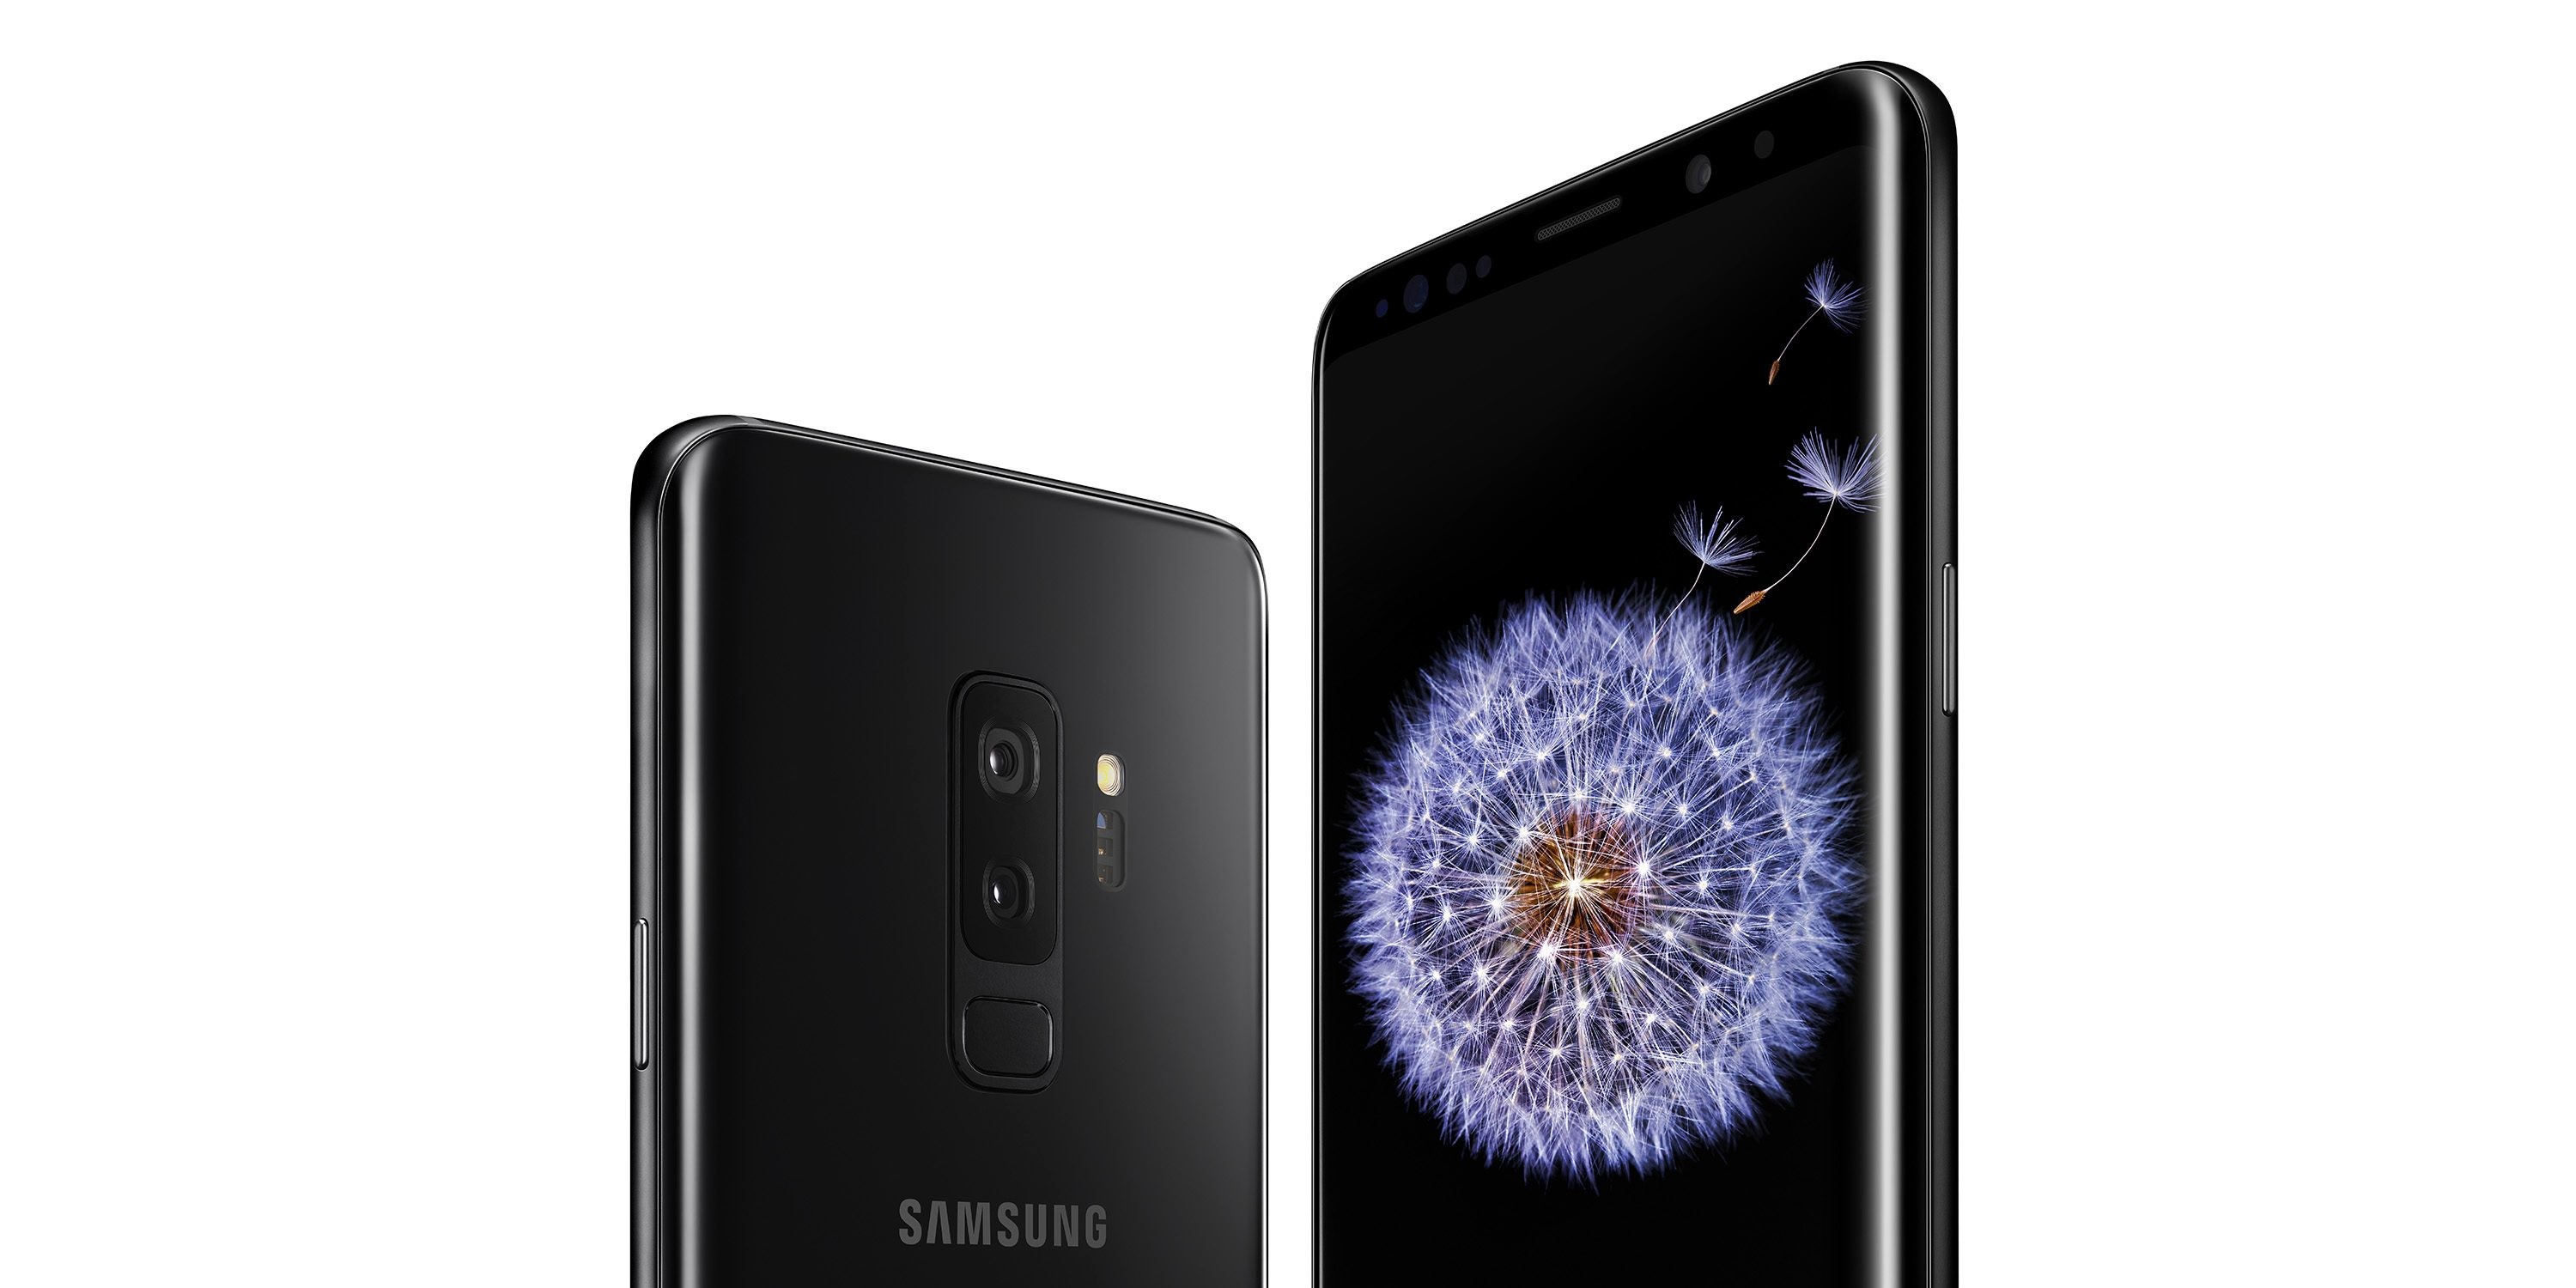 Download The Official Samsung Galaxy S9 & S9 Wallpapers - Samsung Galaxy S9 Boost Mobile - HD Wallpaper 